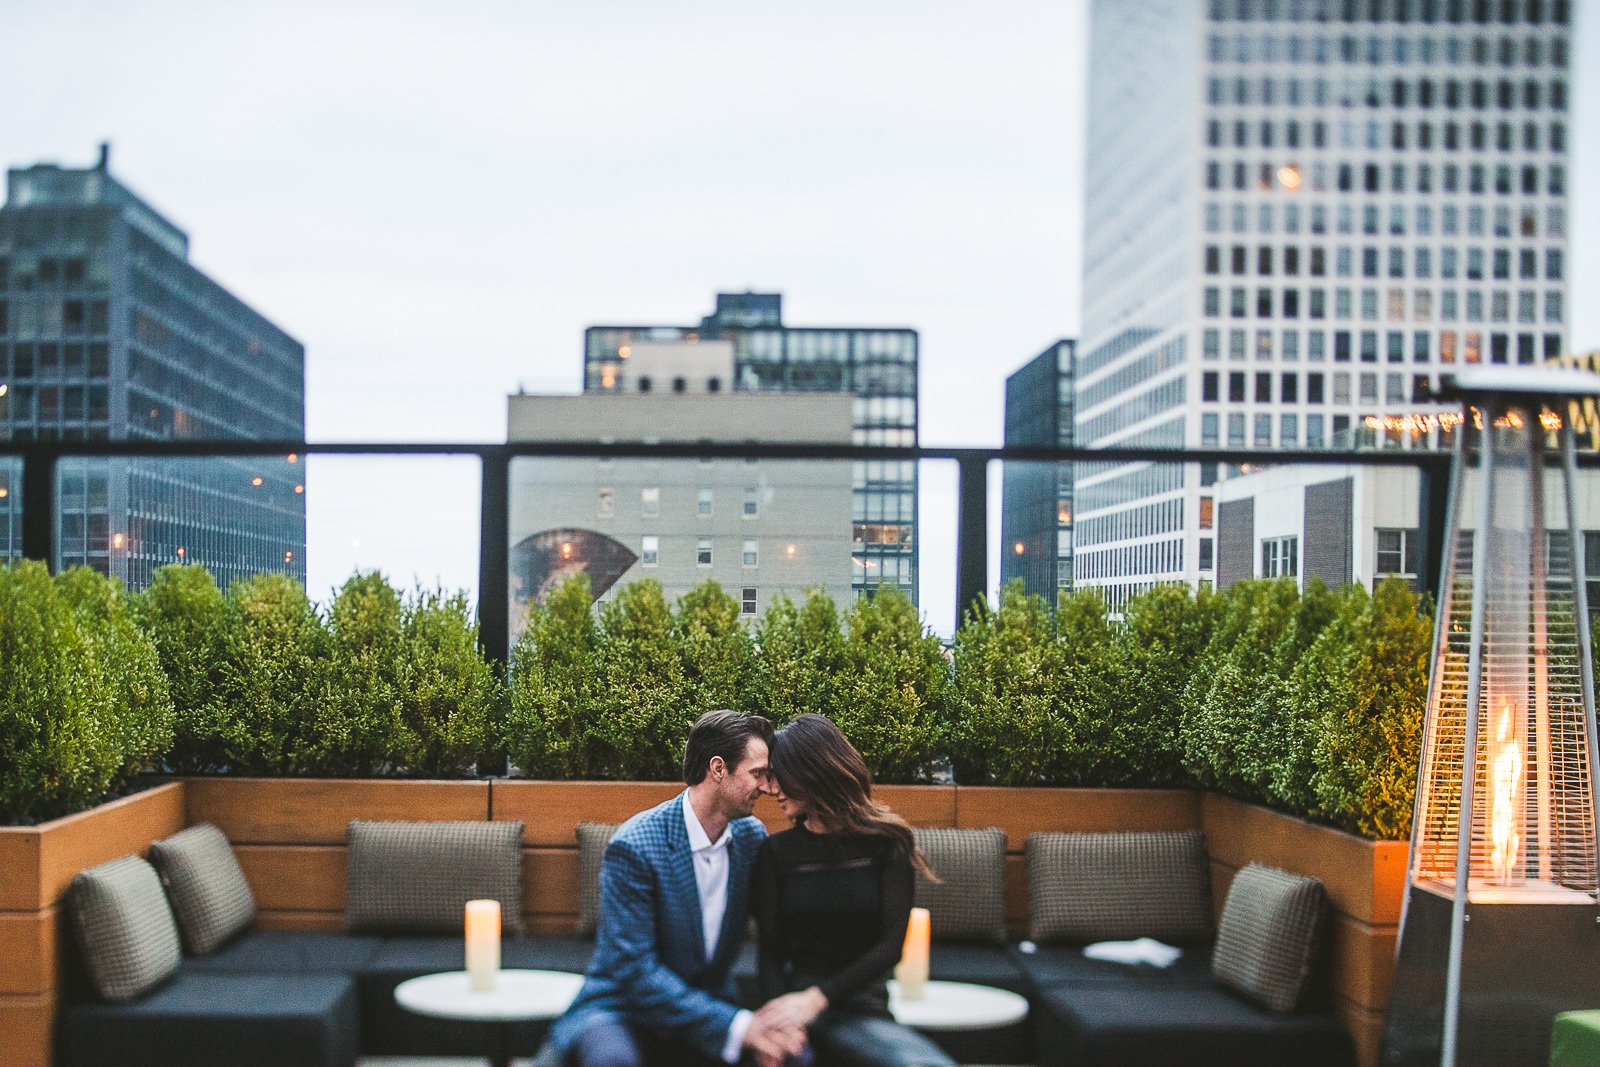 20170318 185053 - Best Locations to Get Engaged in Chicago